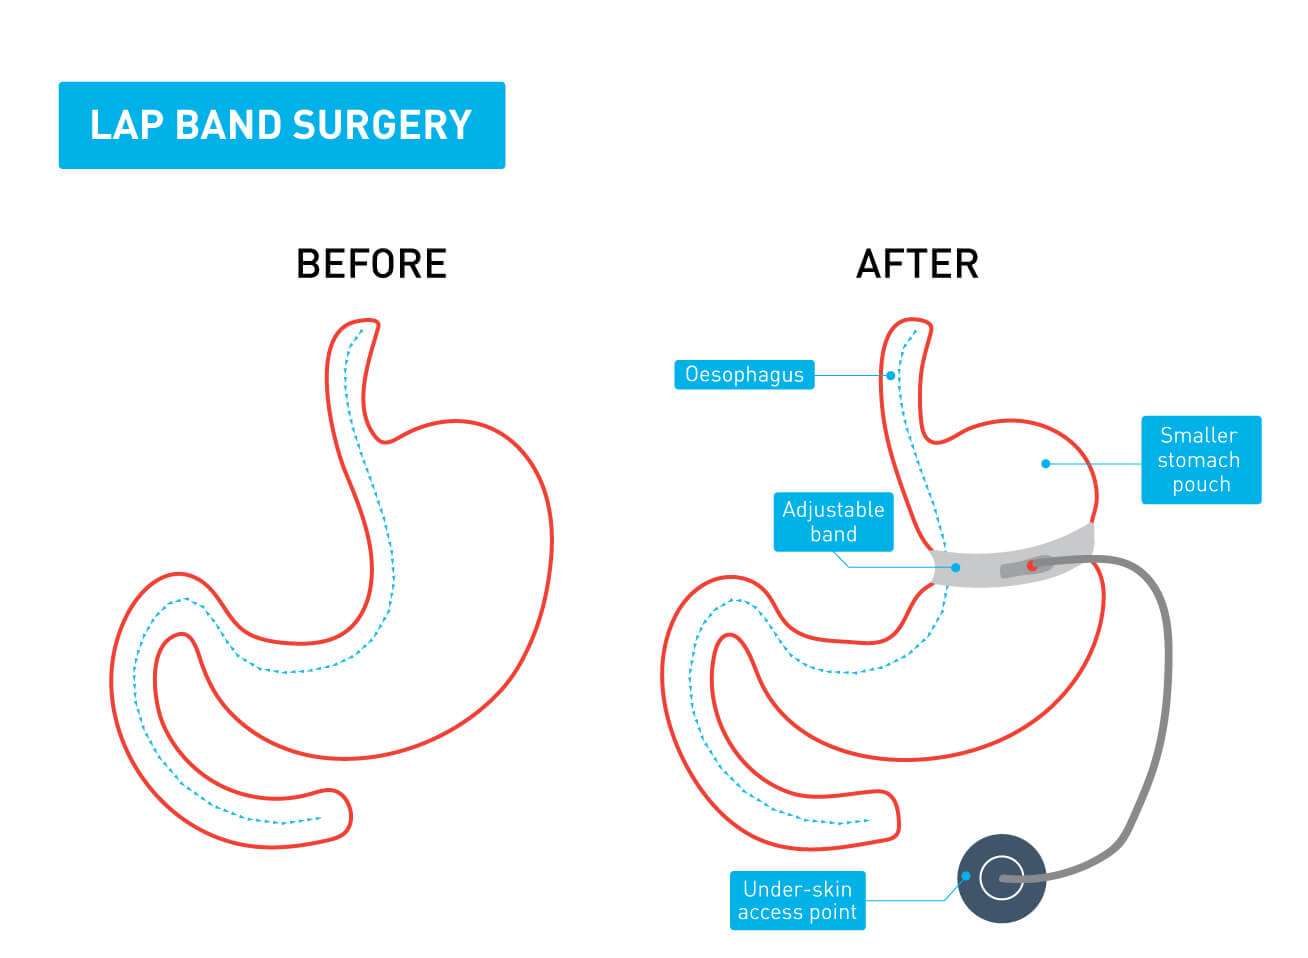 A graphic showing the difference between a stomach before and after lap band surgery